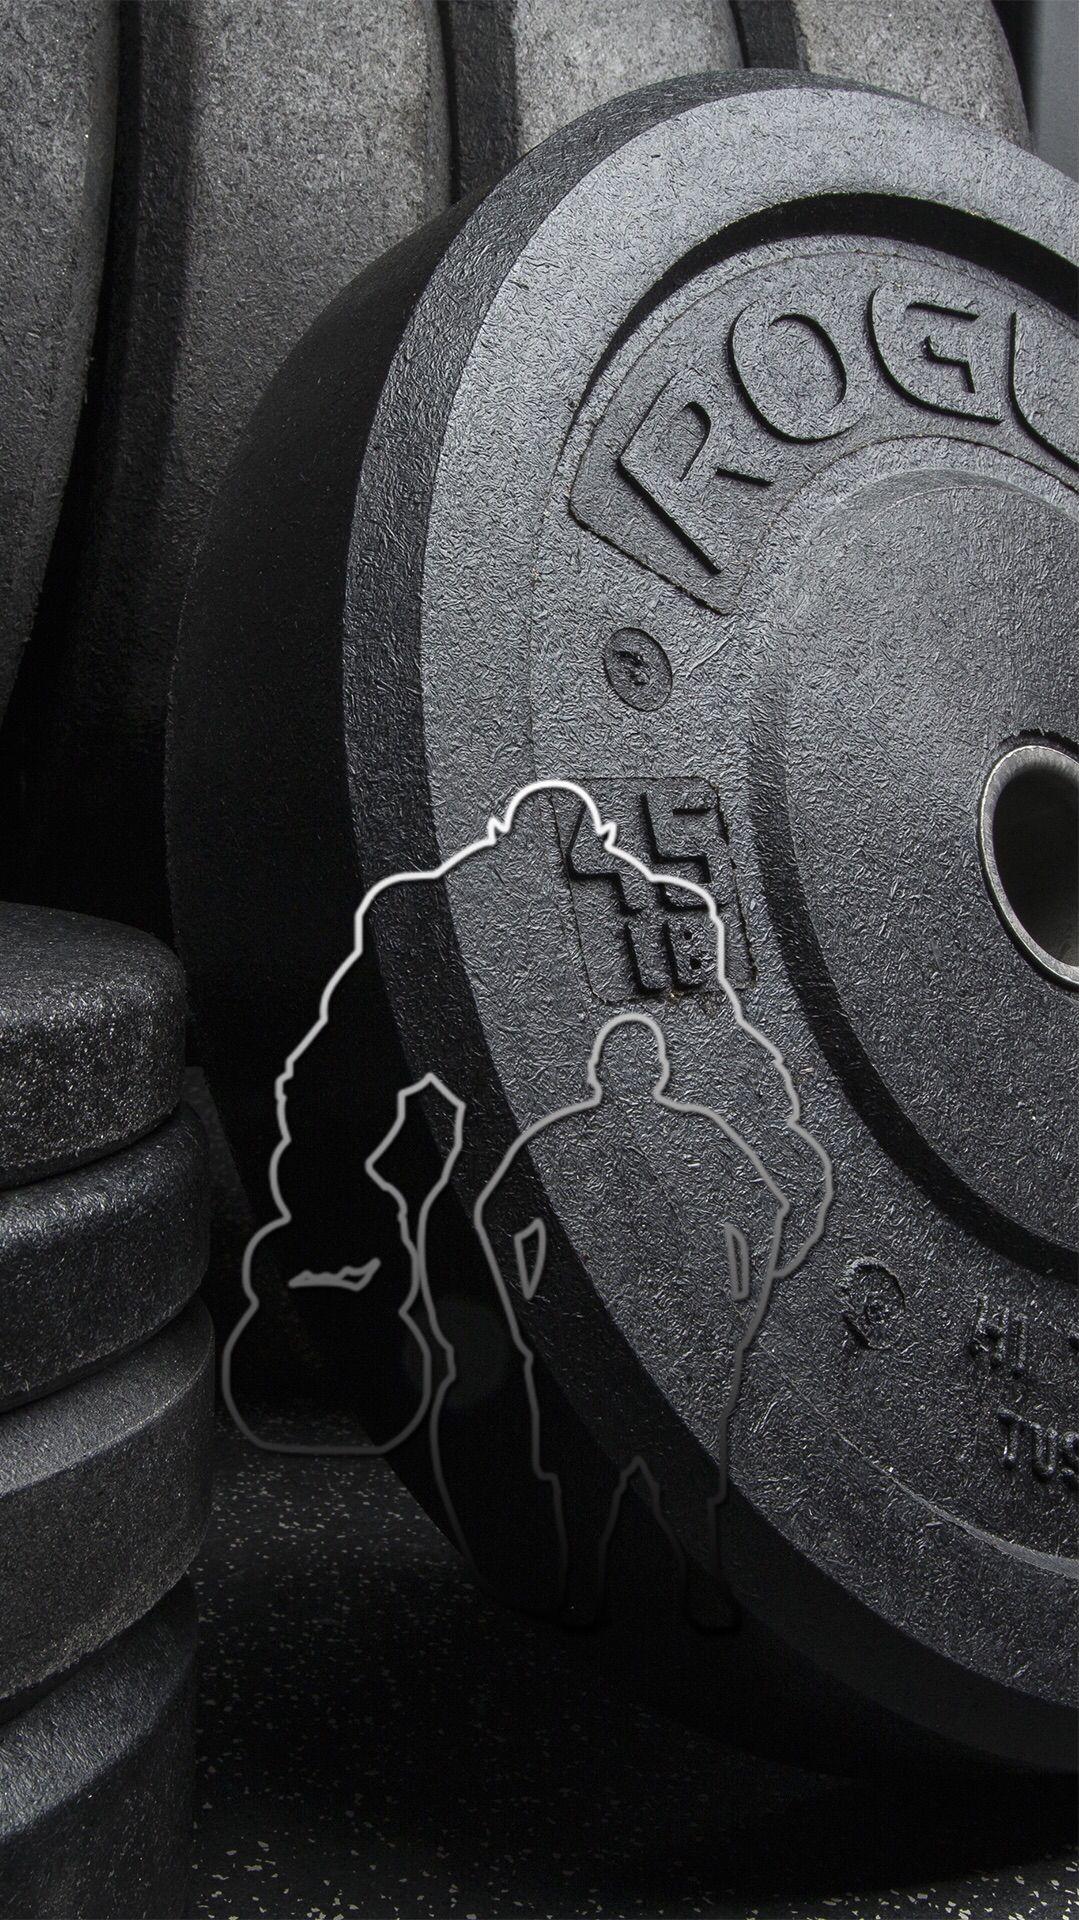 iPhone 6 gym wallpaper to beast. Gym. Fitness motivation